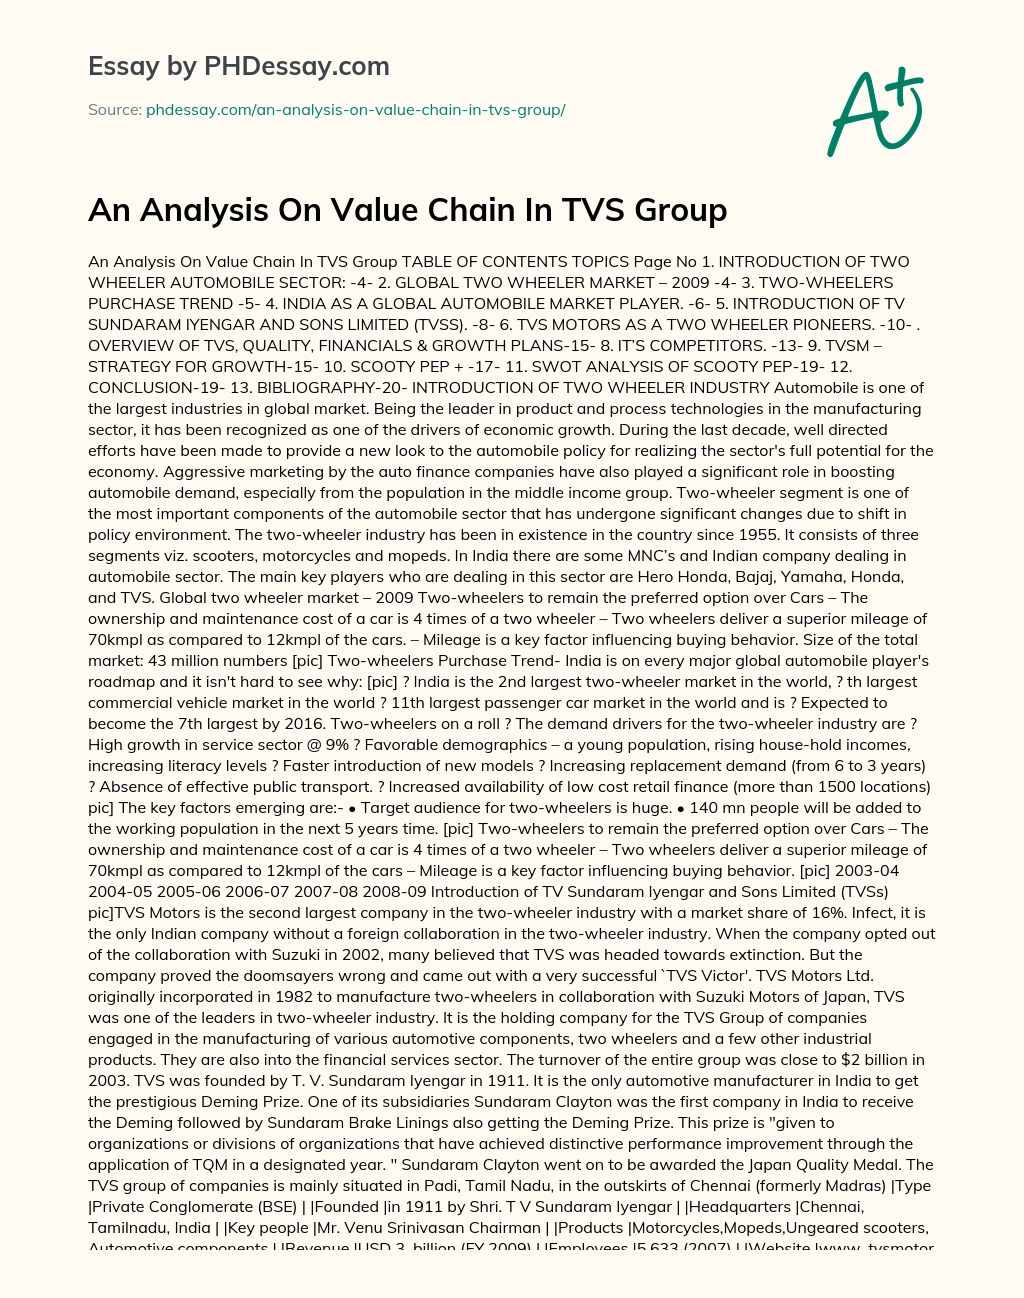 An Analysis On Value Chain In TVS Group essay